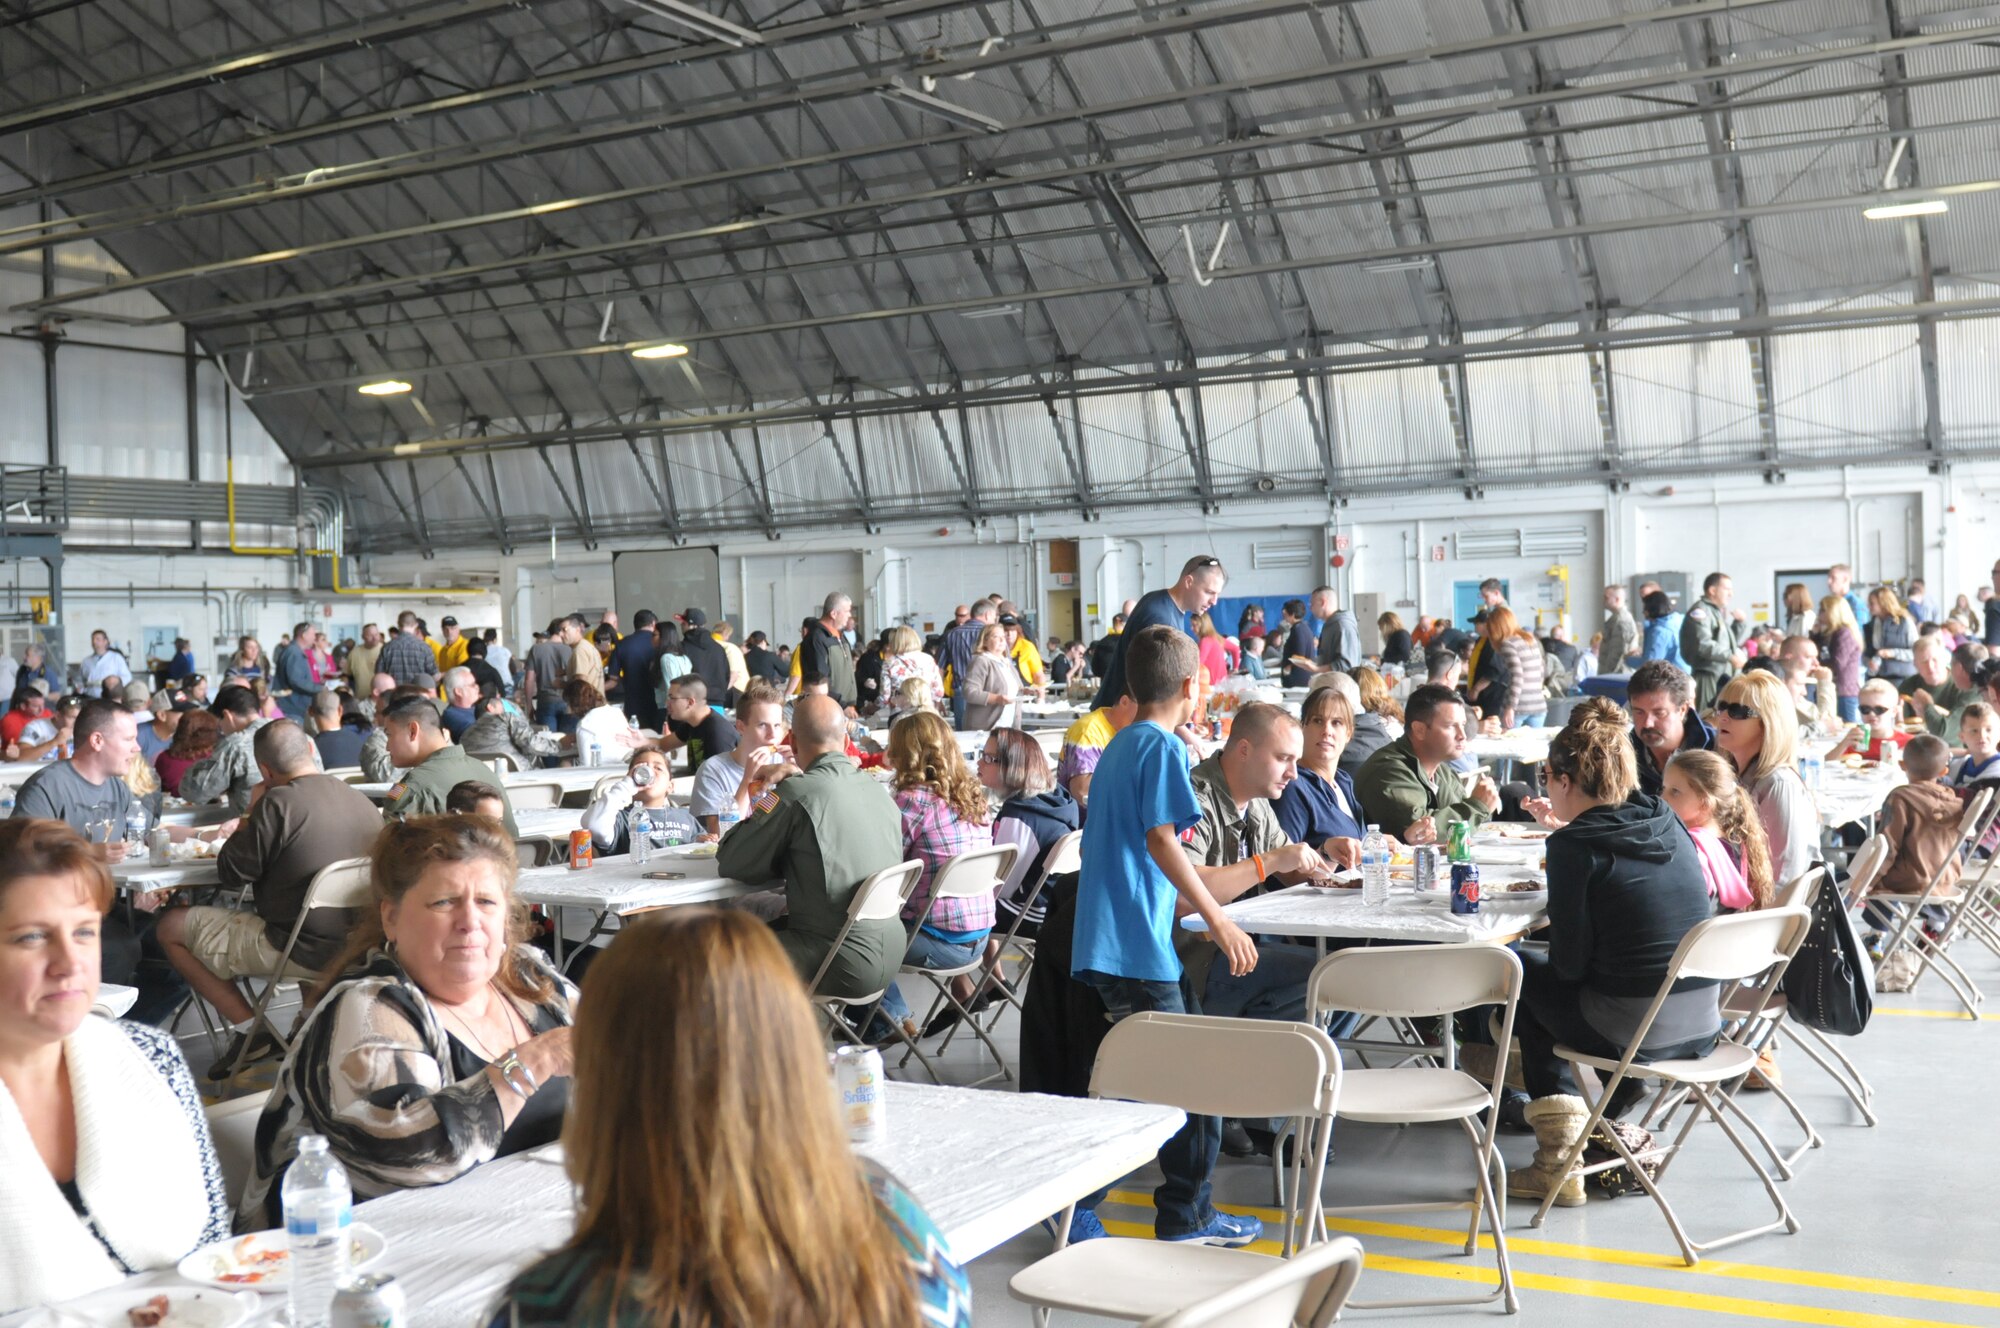 About 3,000 people attended the 109th Airlift Wing's Family Day at Stratton Air National Guard Base, N.Y., on Sept. 14, 2014. The day included food, music, games, static displays and much more for Airmen and their families. (U.S. Air National Guard photo by Master Sgt. William Gizara/Released)